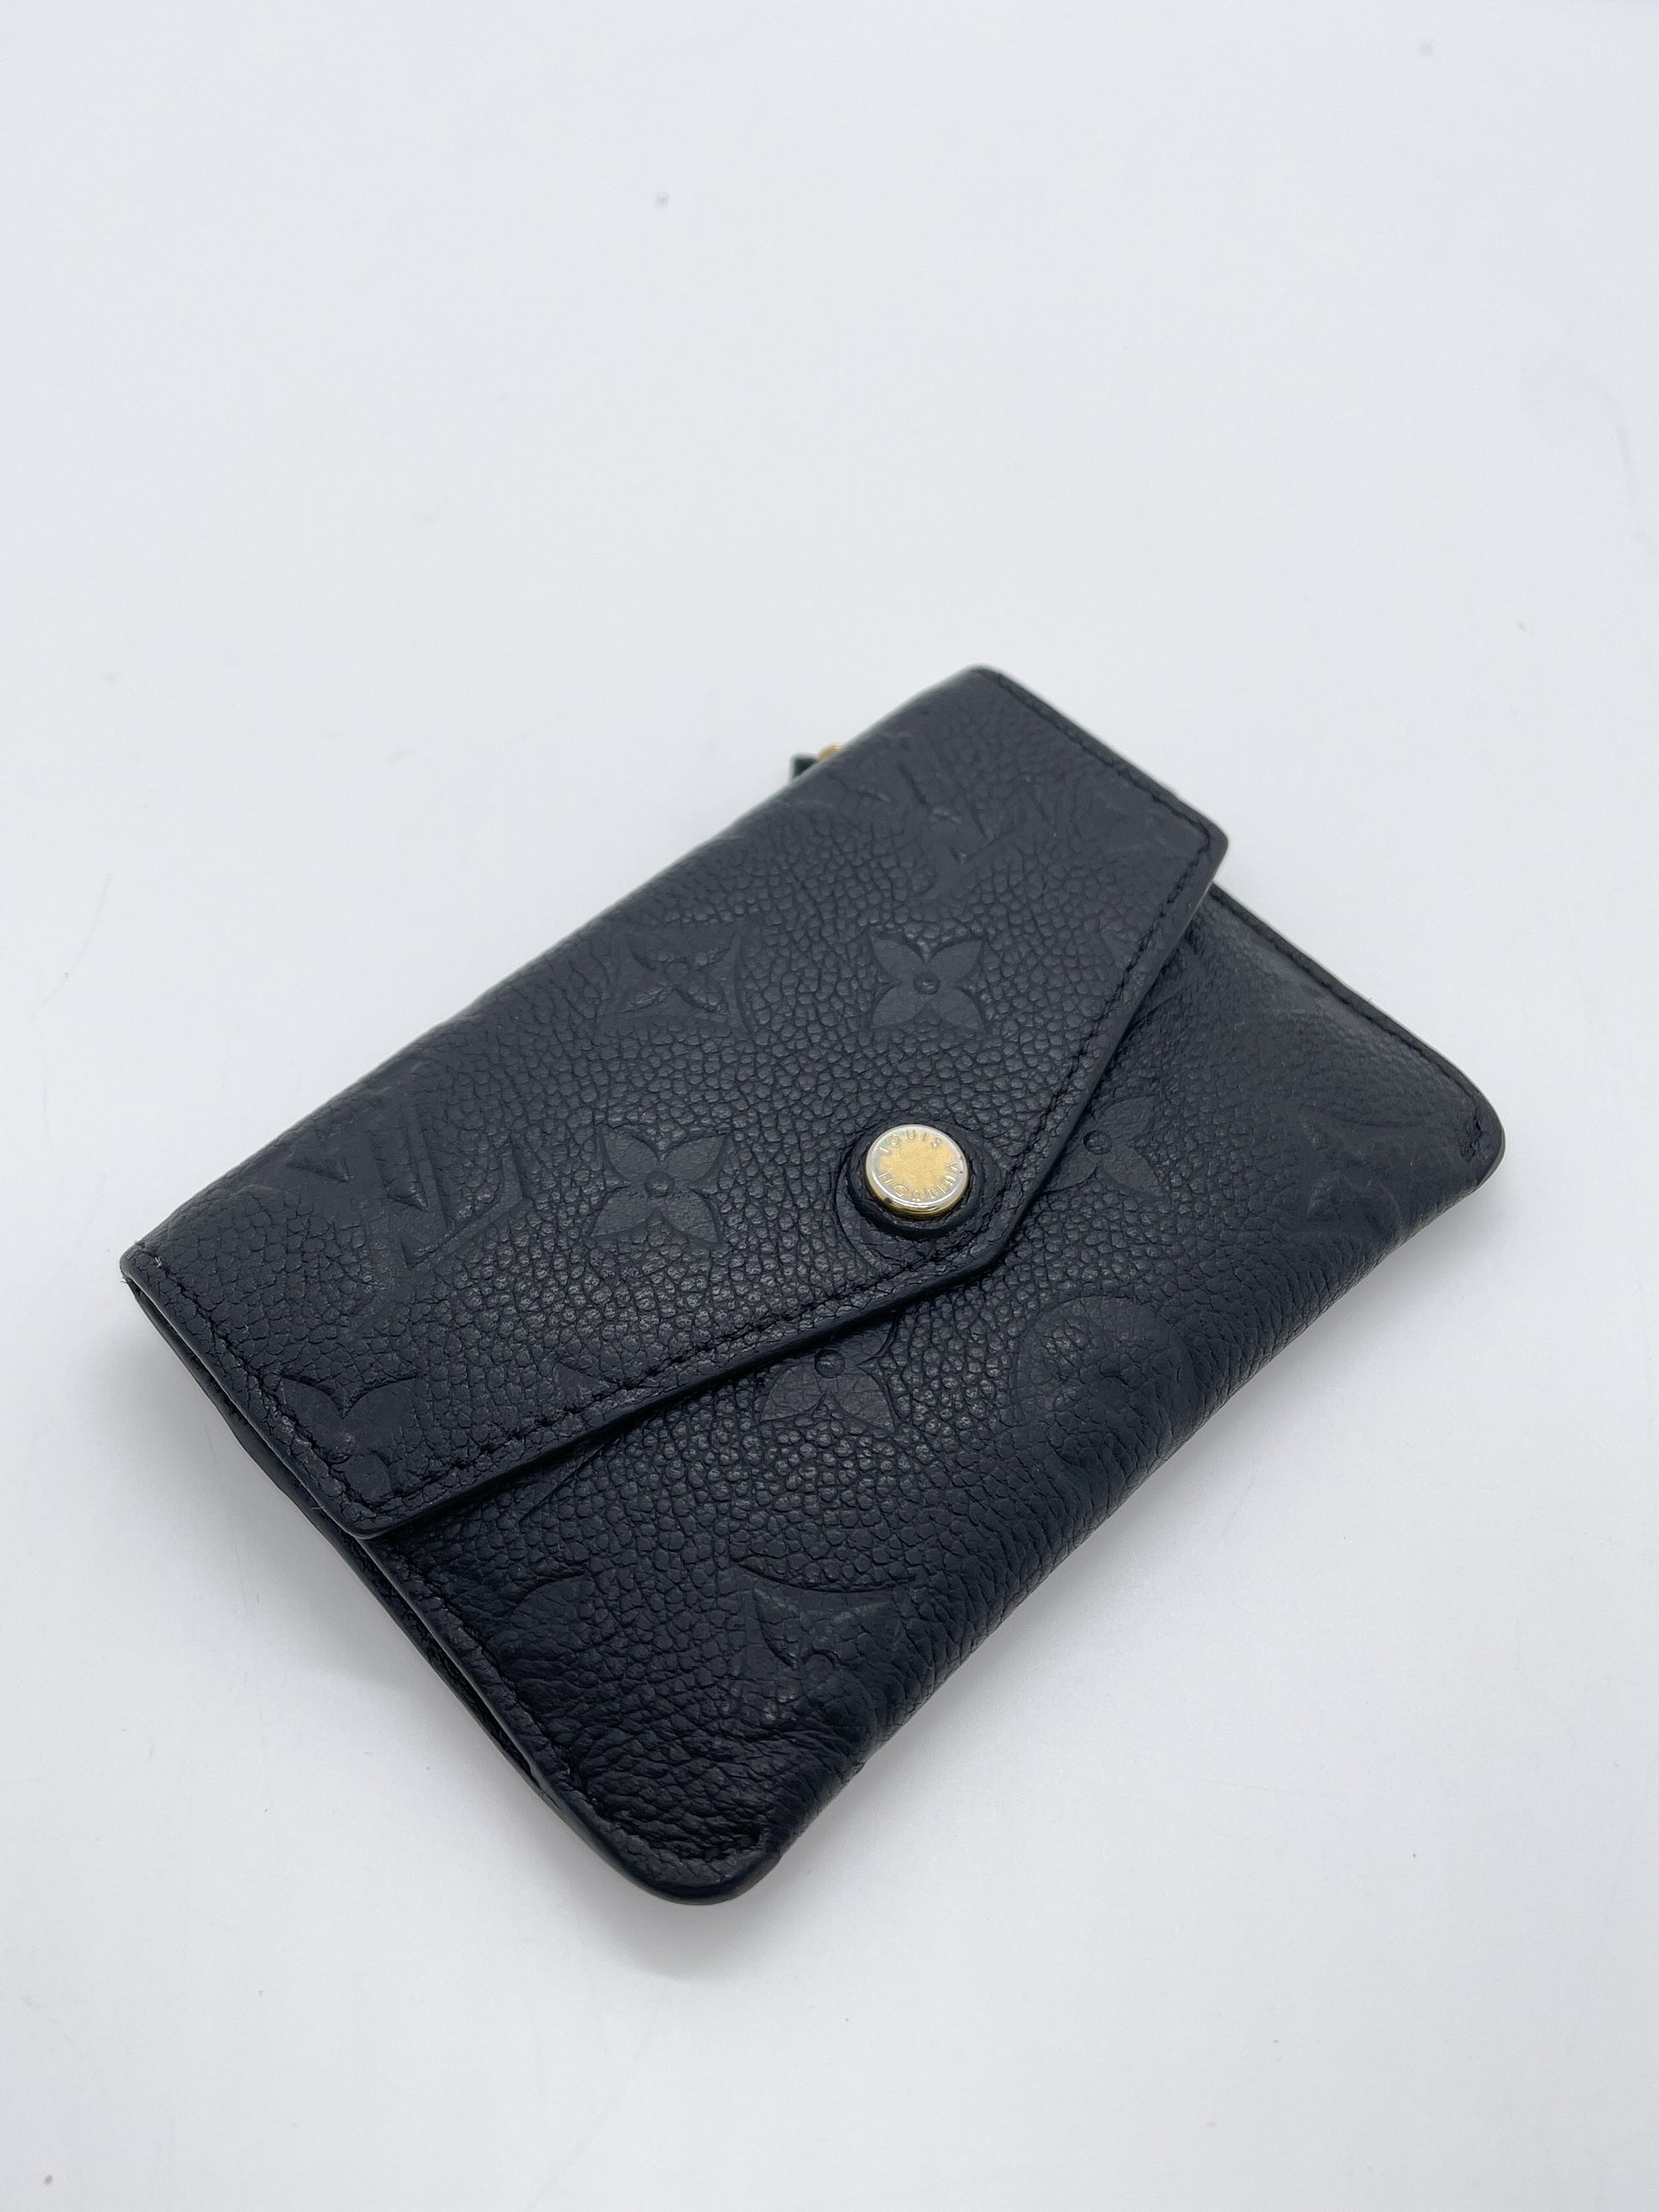 Key Pouch Monogram Empreinte Leather - Wallets and Small Leather Goods